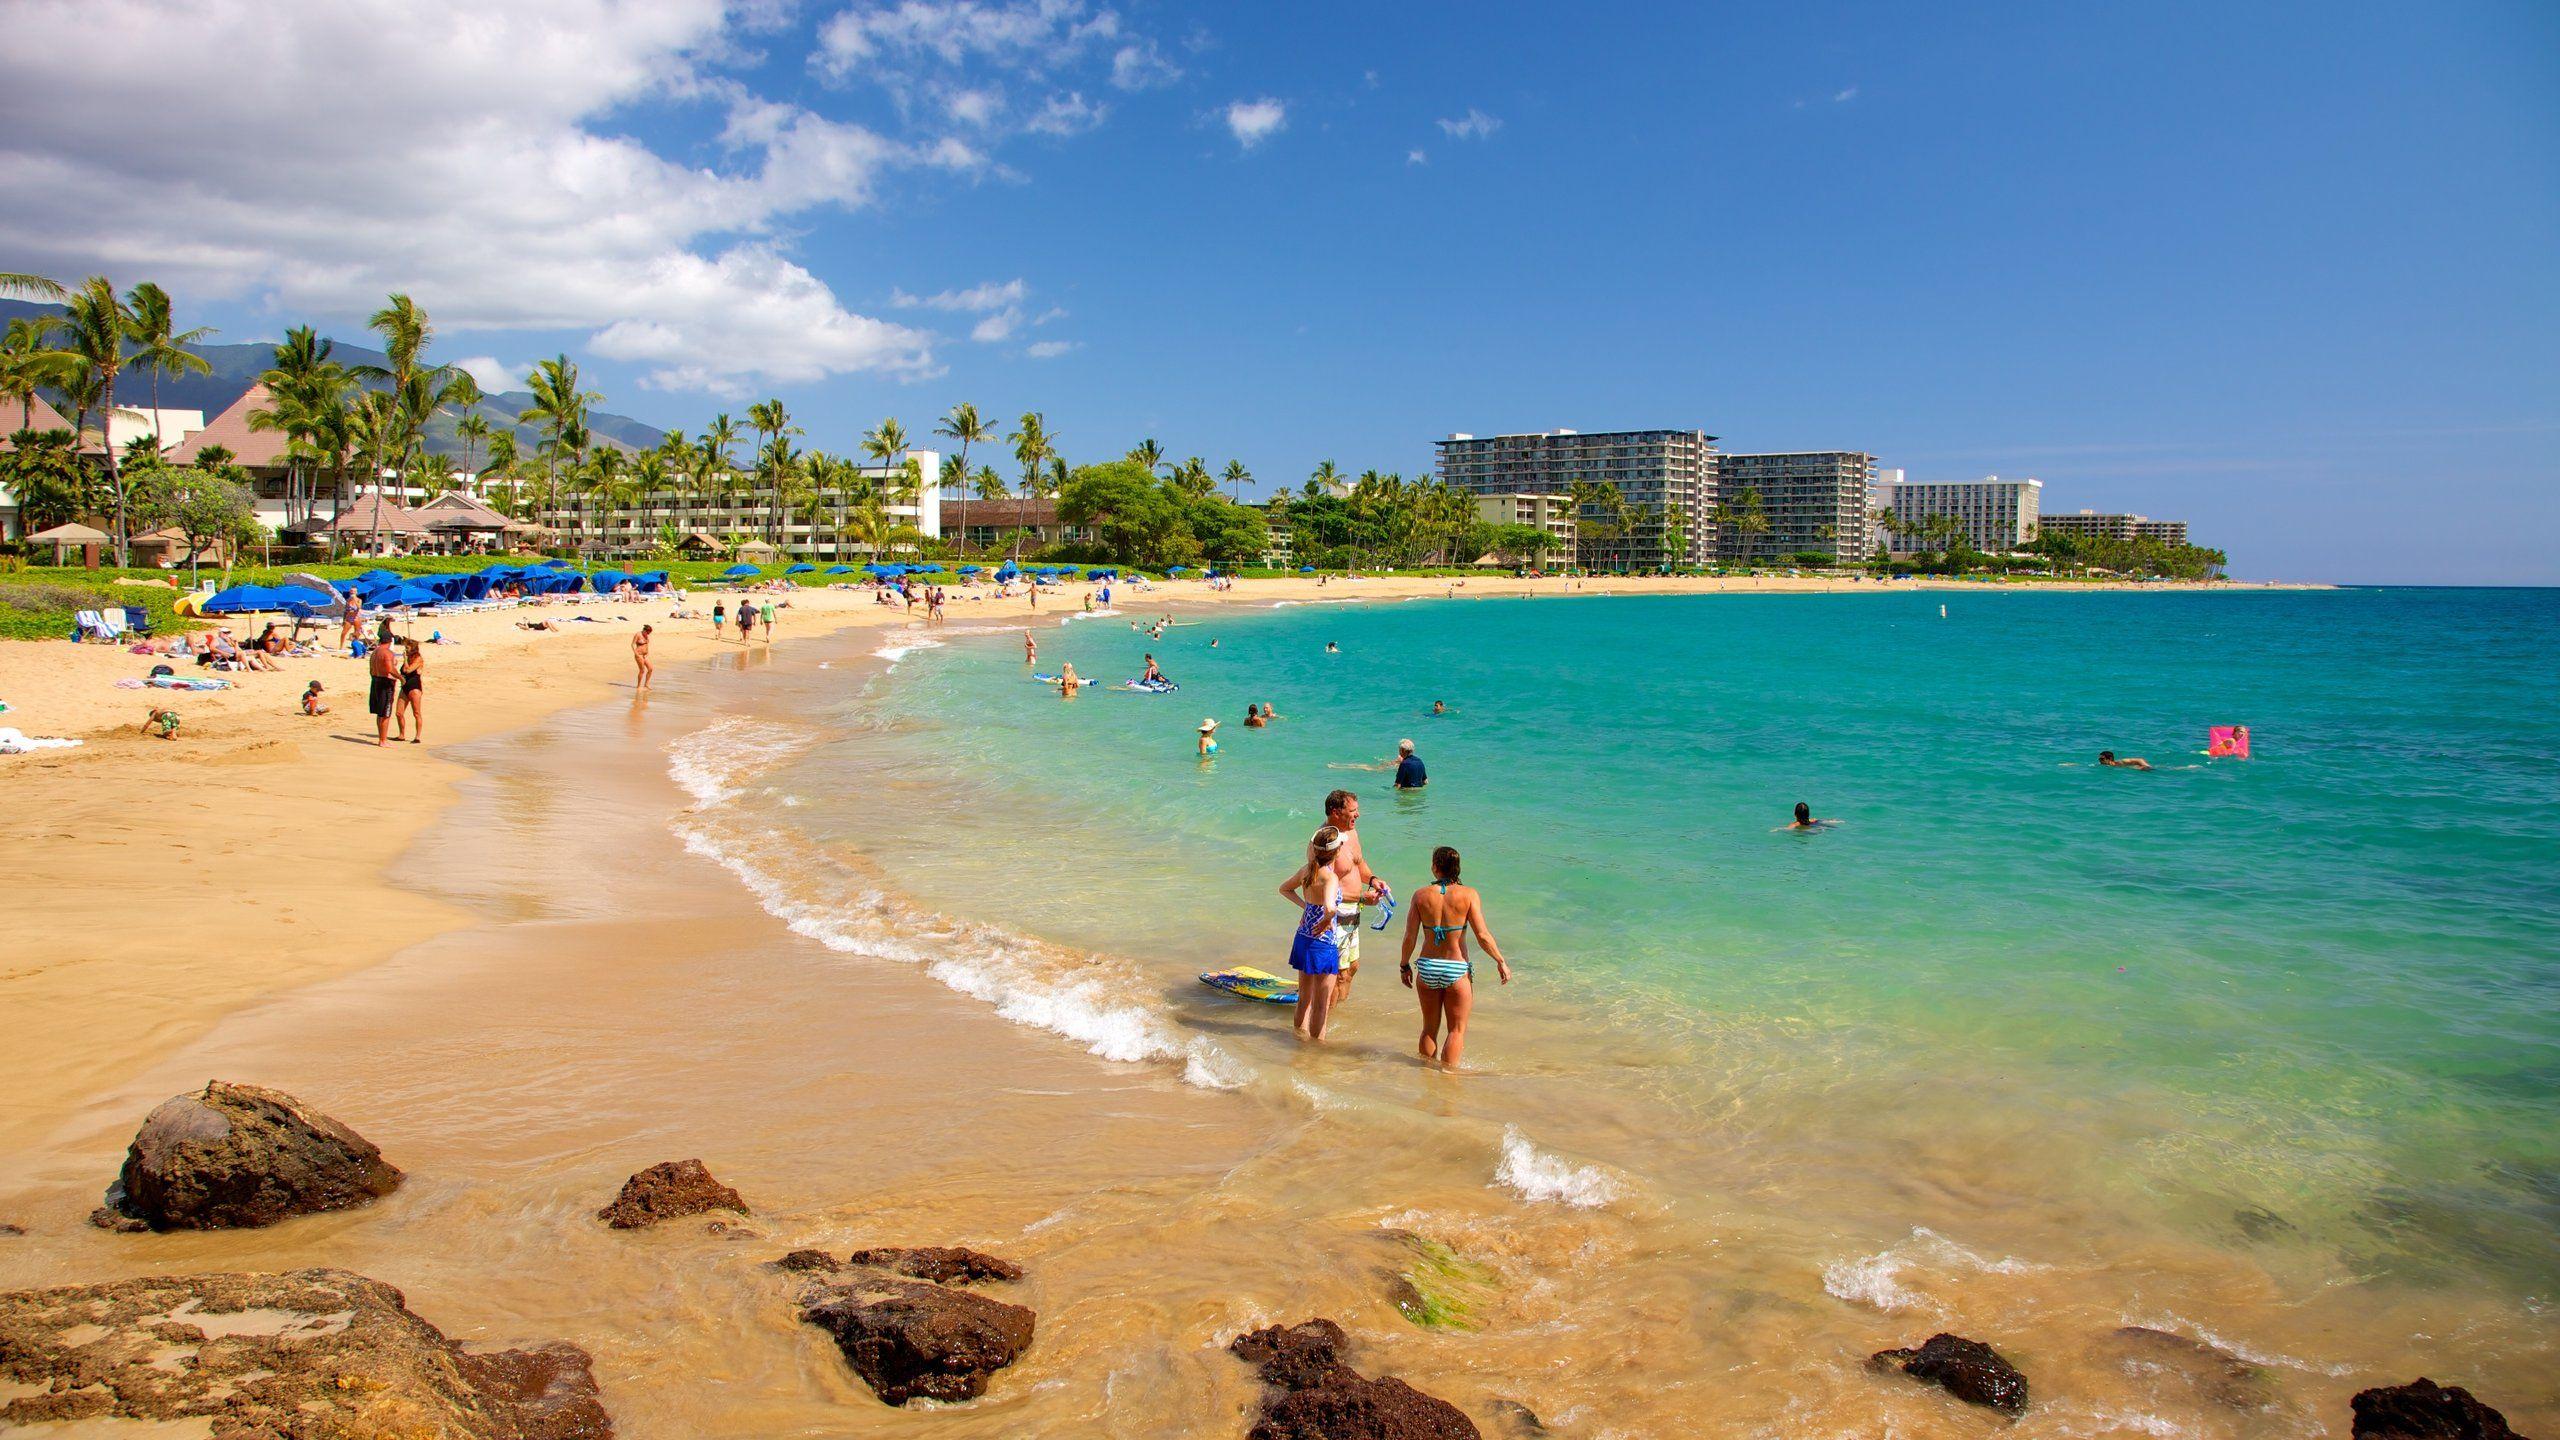 Maui All Inclusive Hotels $575: Find All Inclusive Hotels